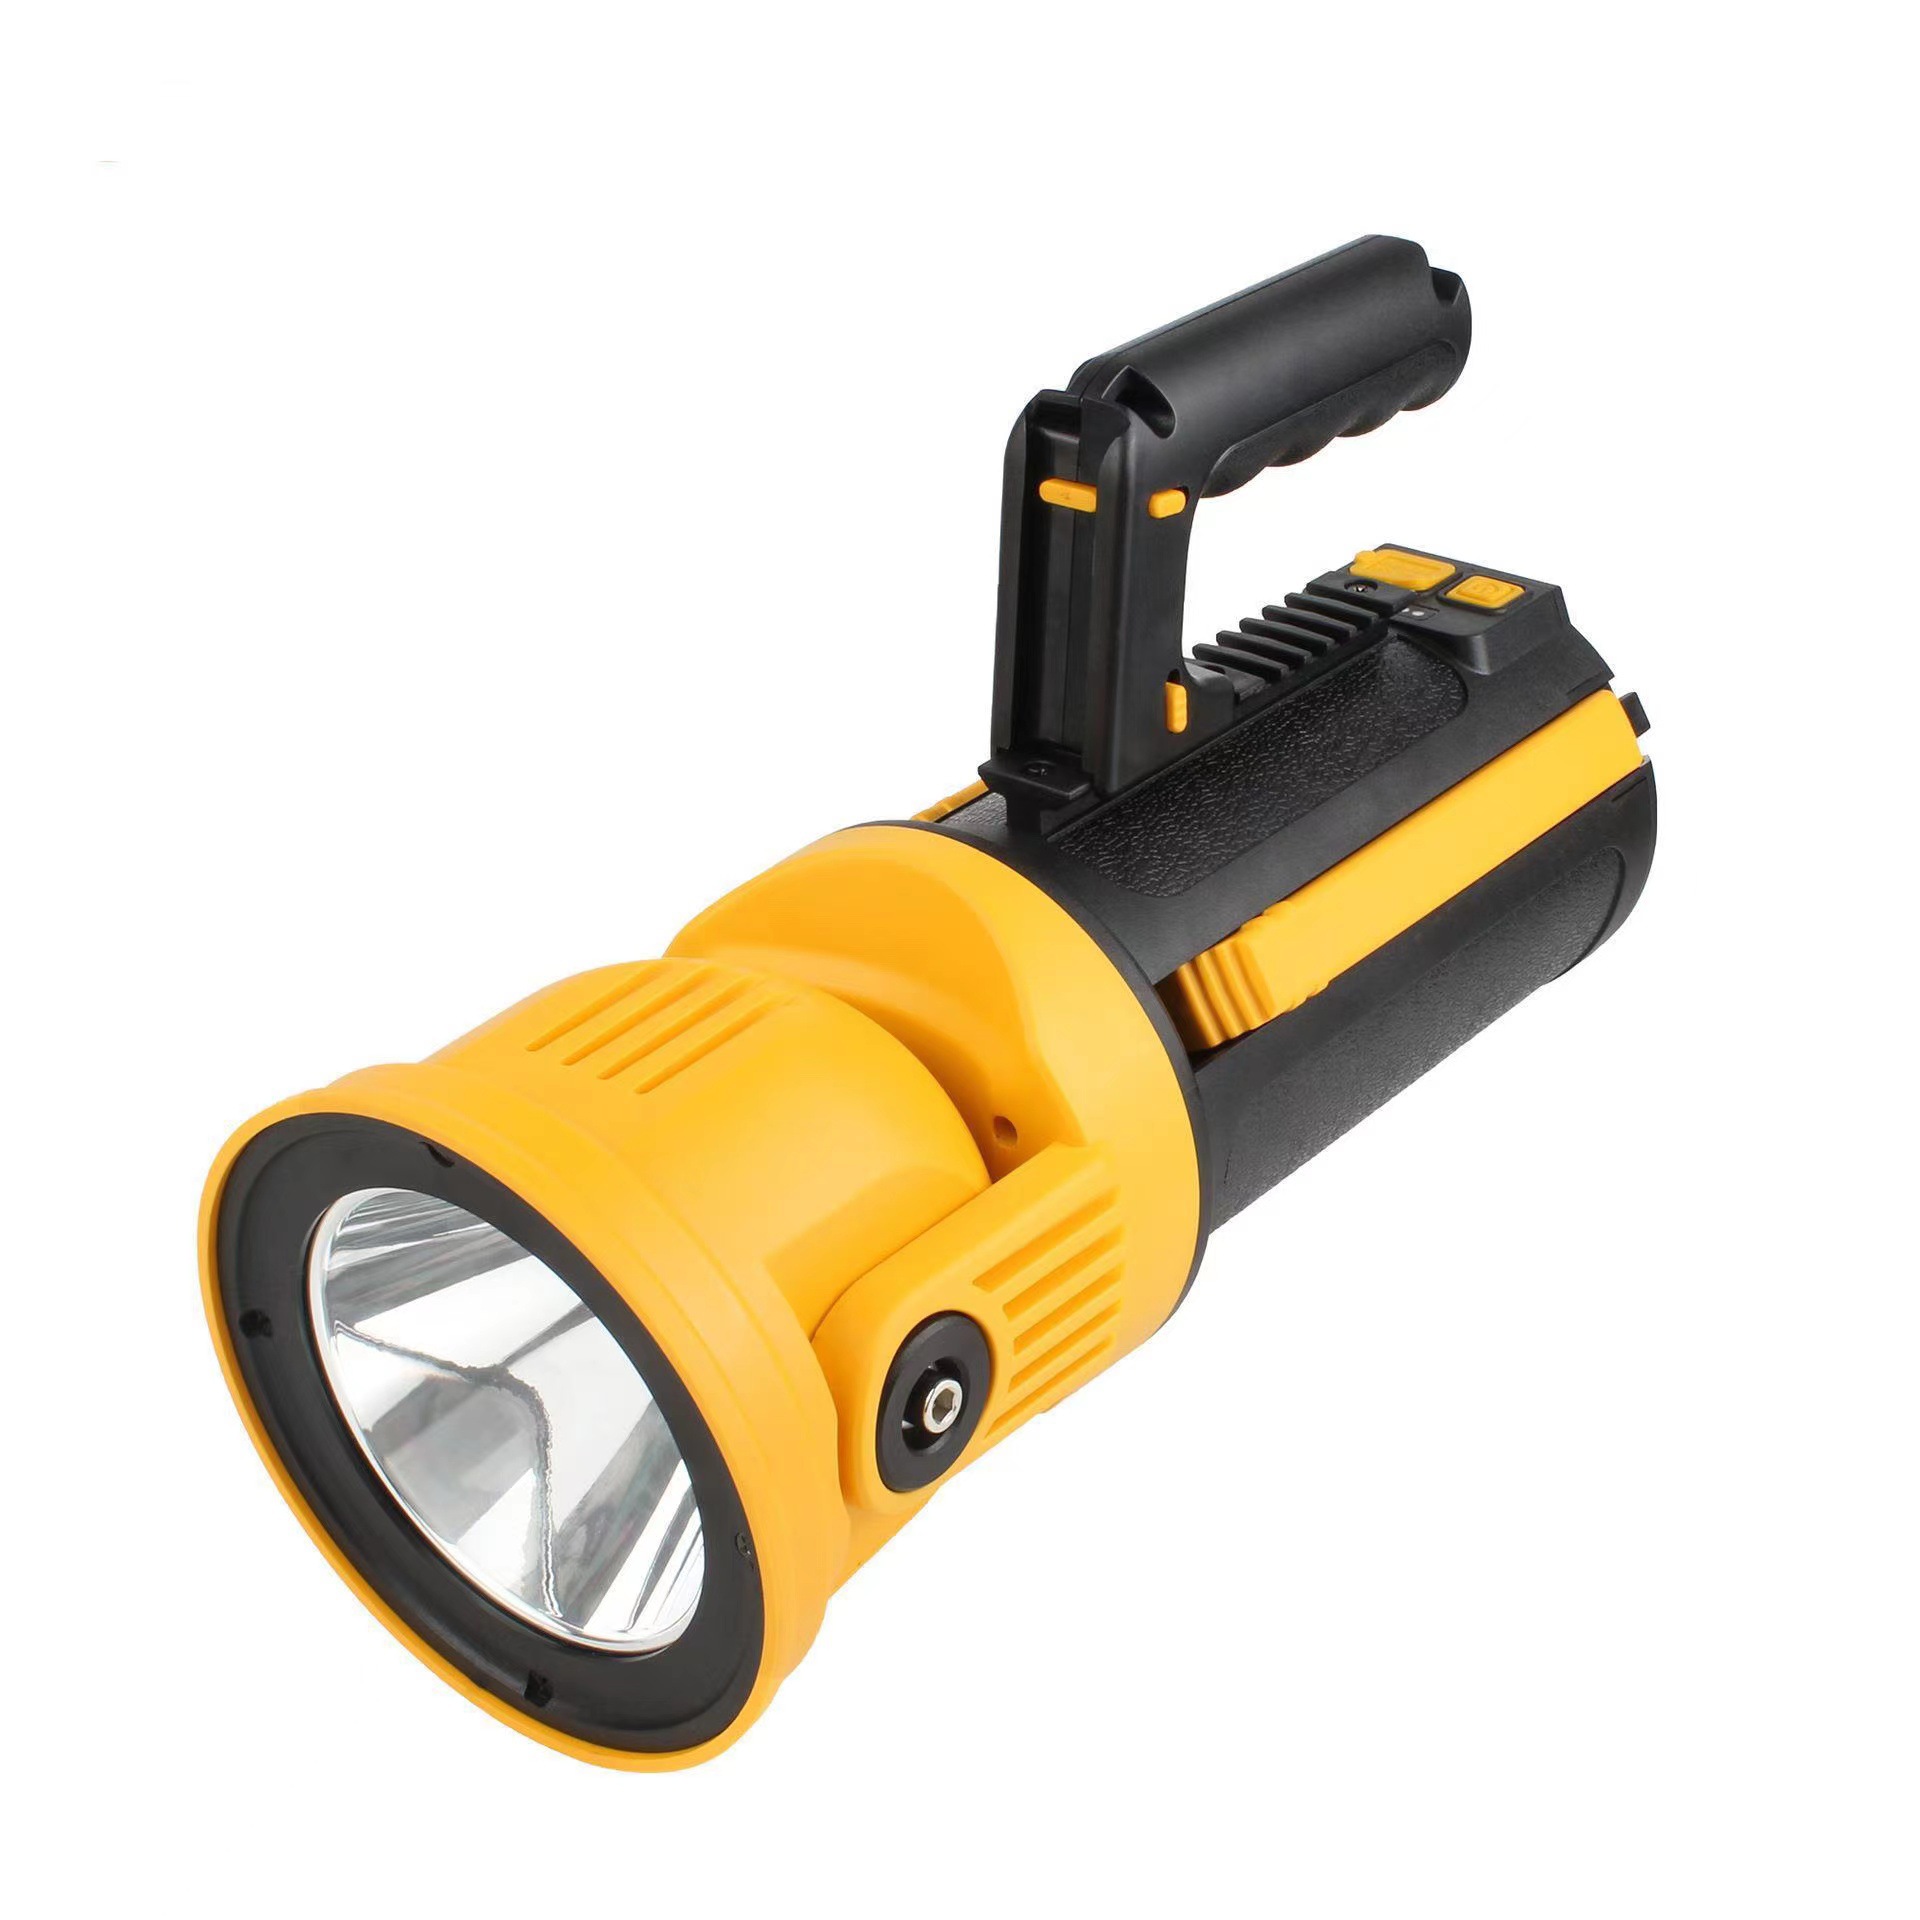 Cross-Border New Arrival TYPE-C Strong Light Portable Searchlight Multifunctional Foldable Work Light with Bracket Portable Lamp